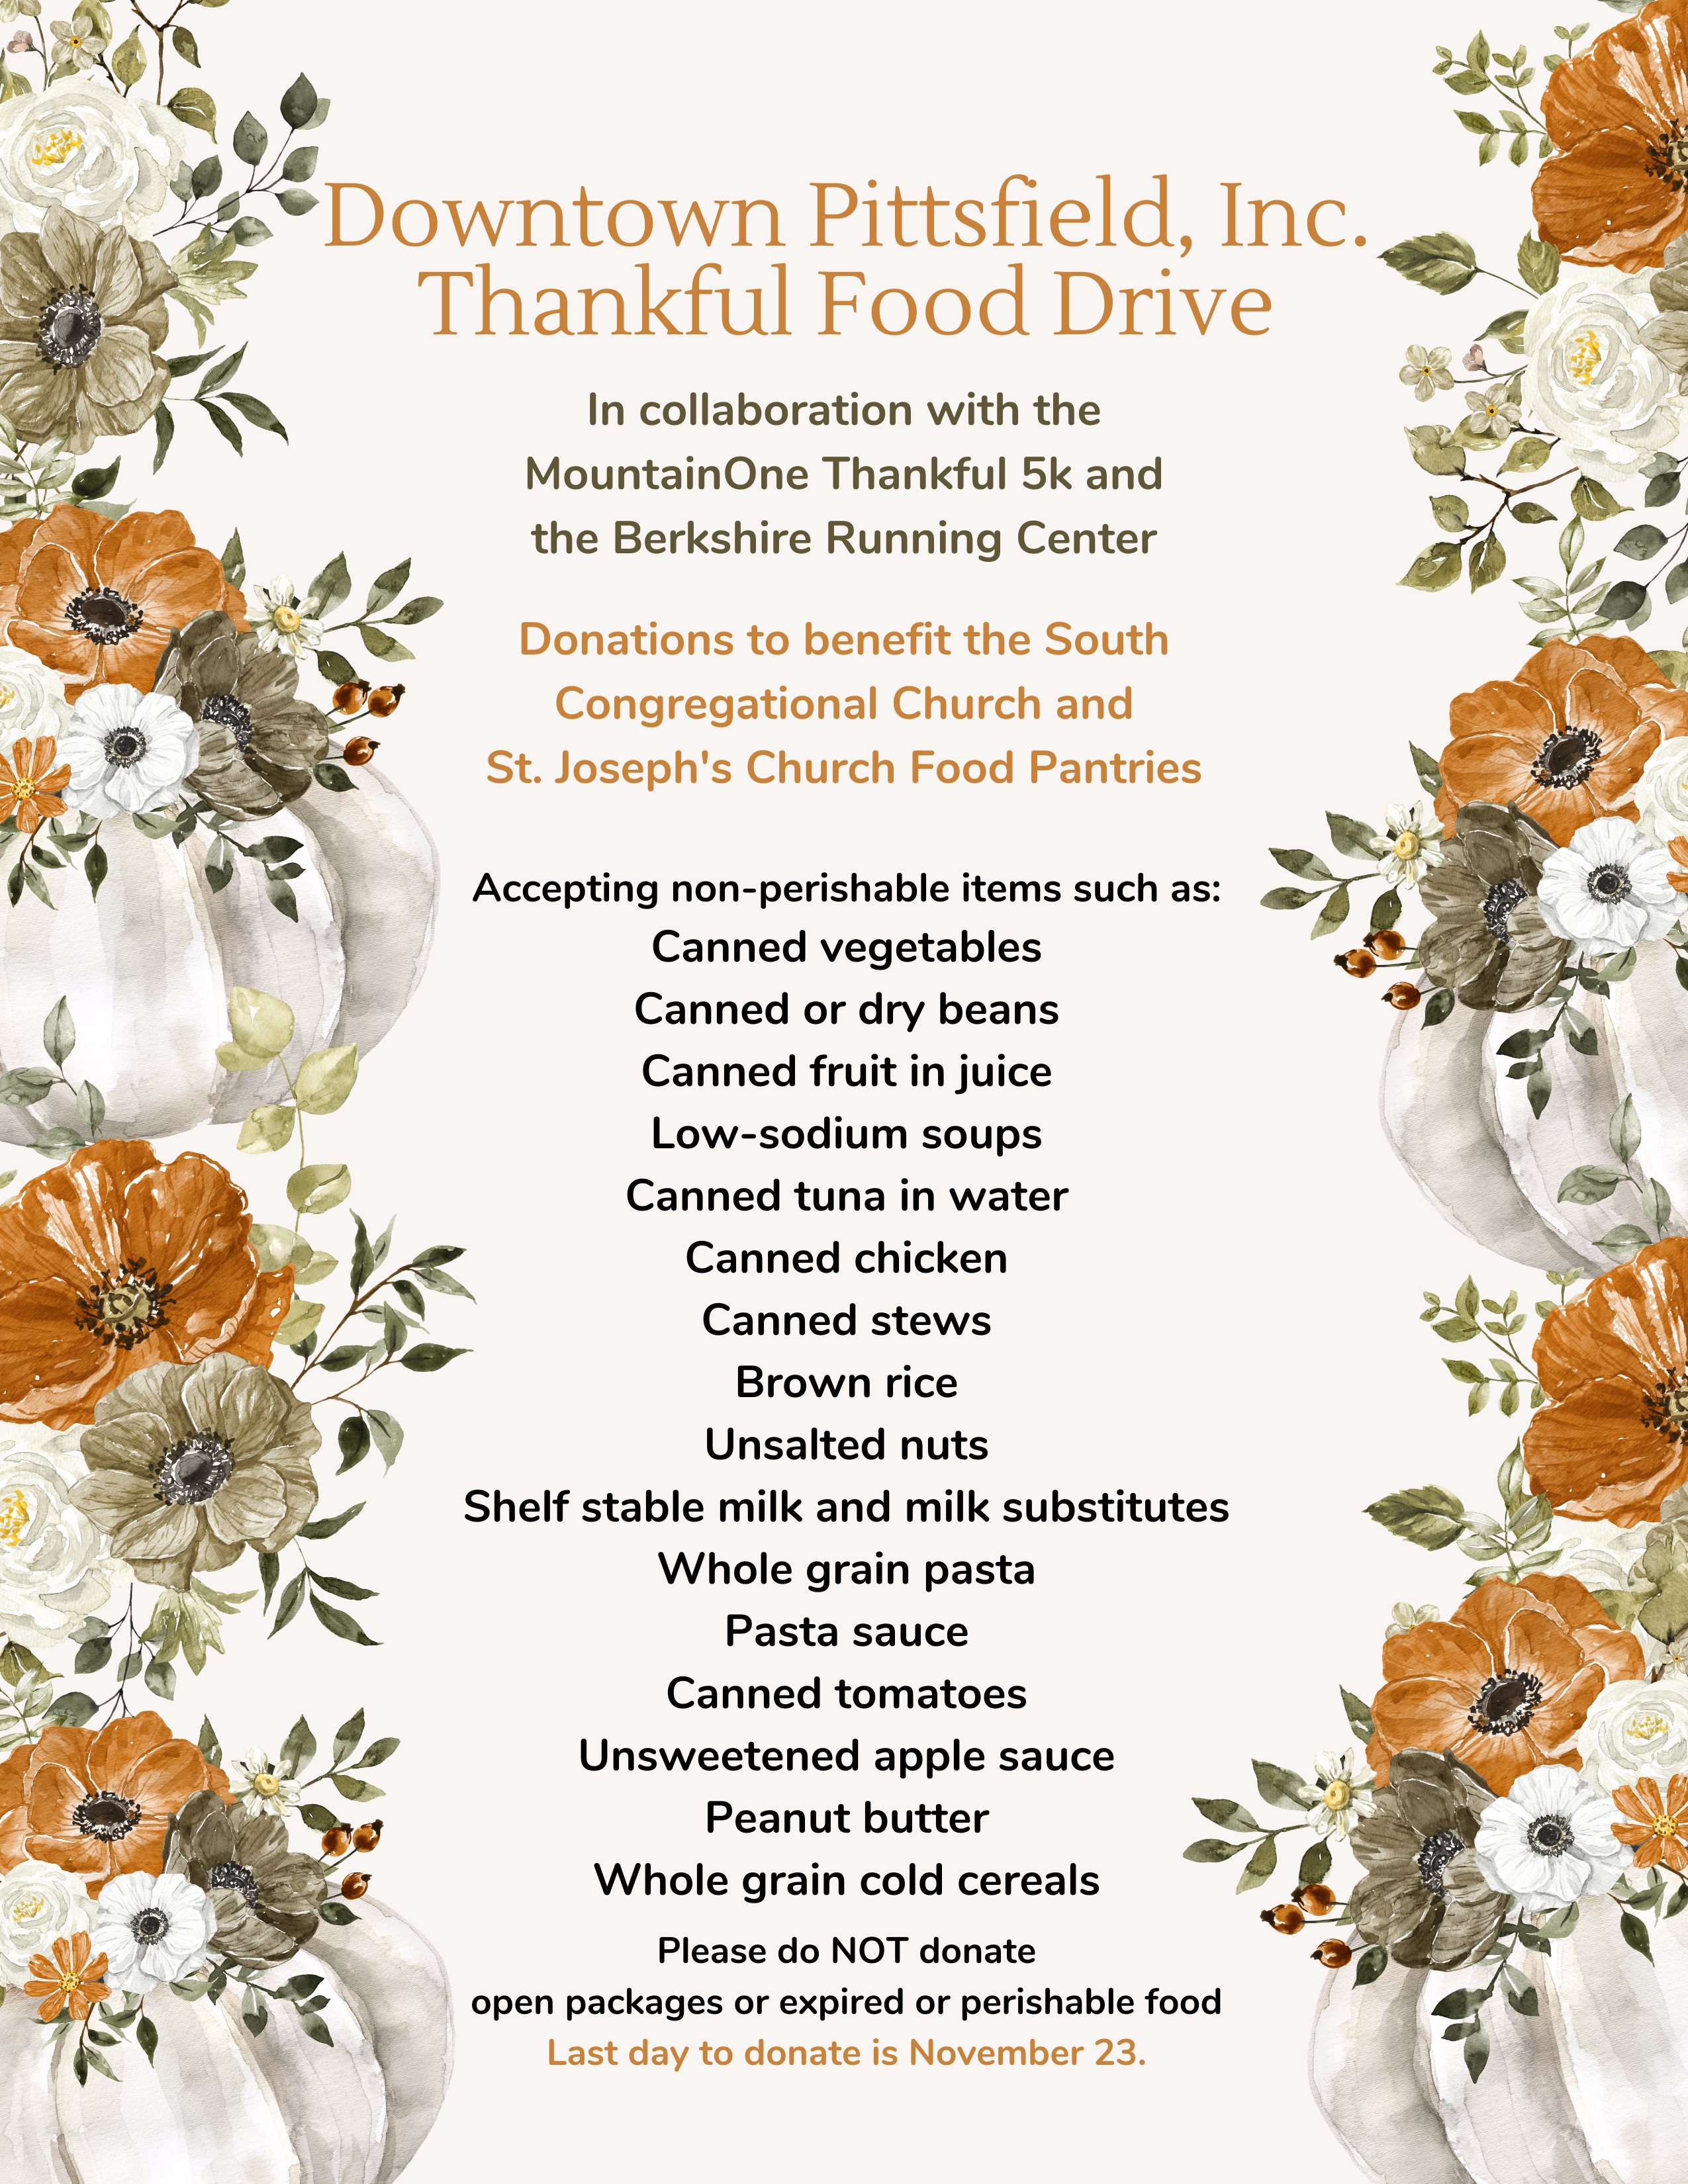 Downtown Pittsfield, Inc. is hosting a Thankful Food Drive